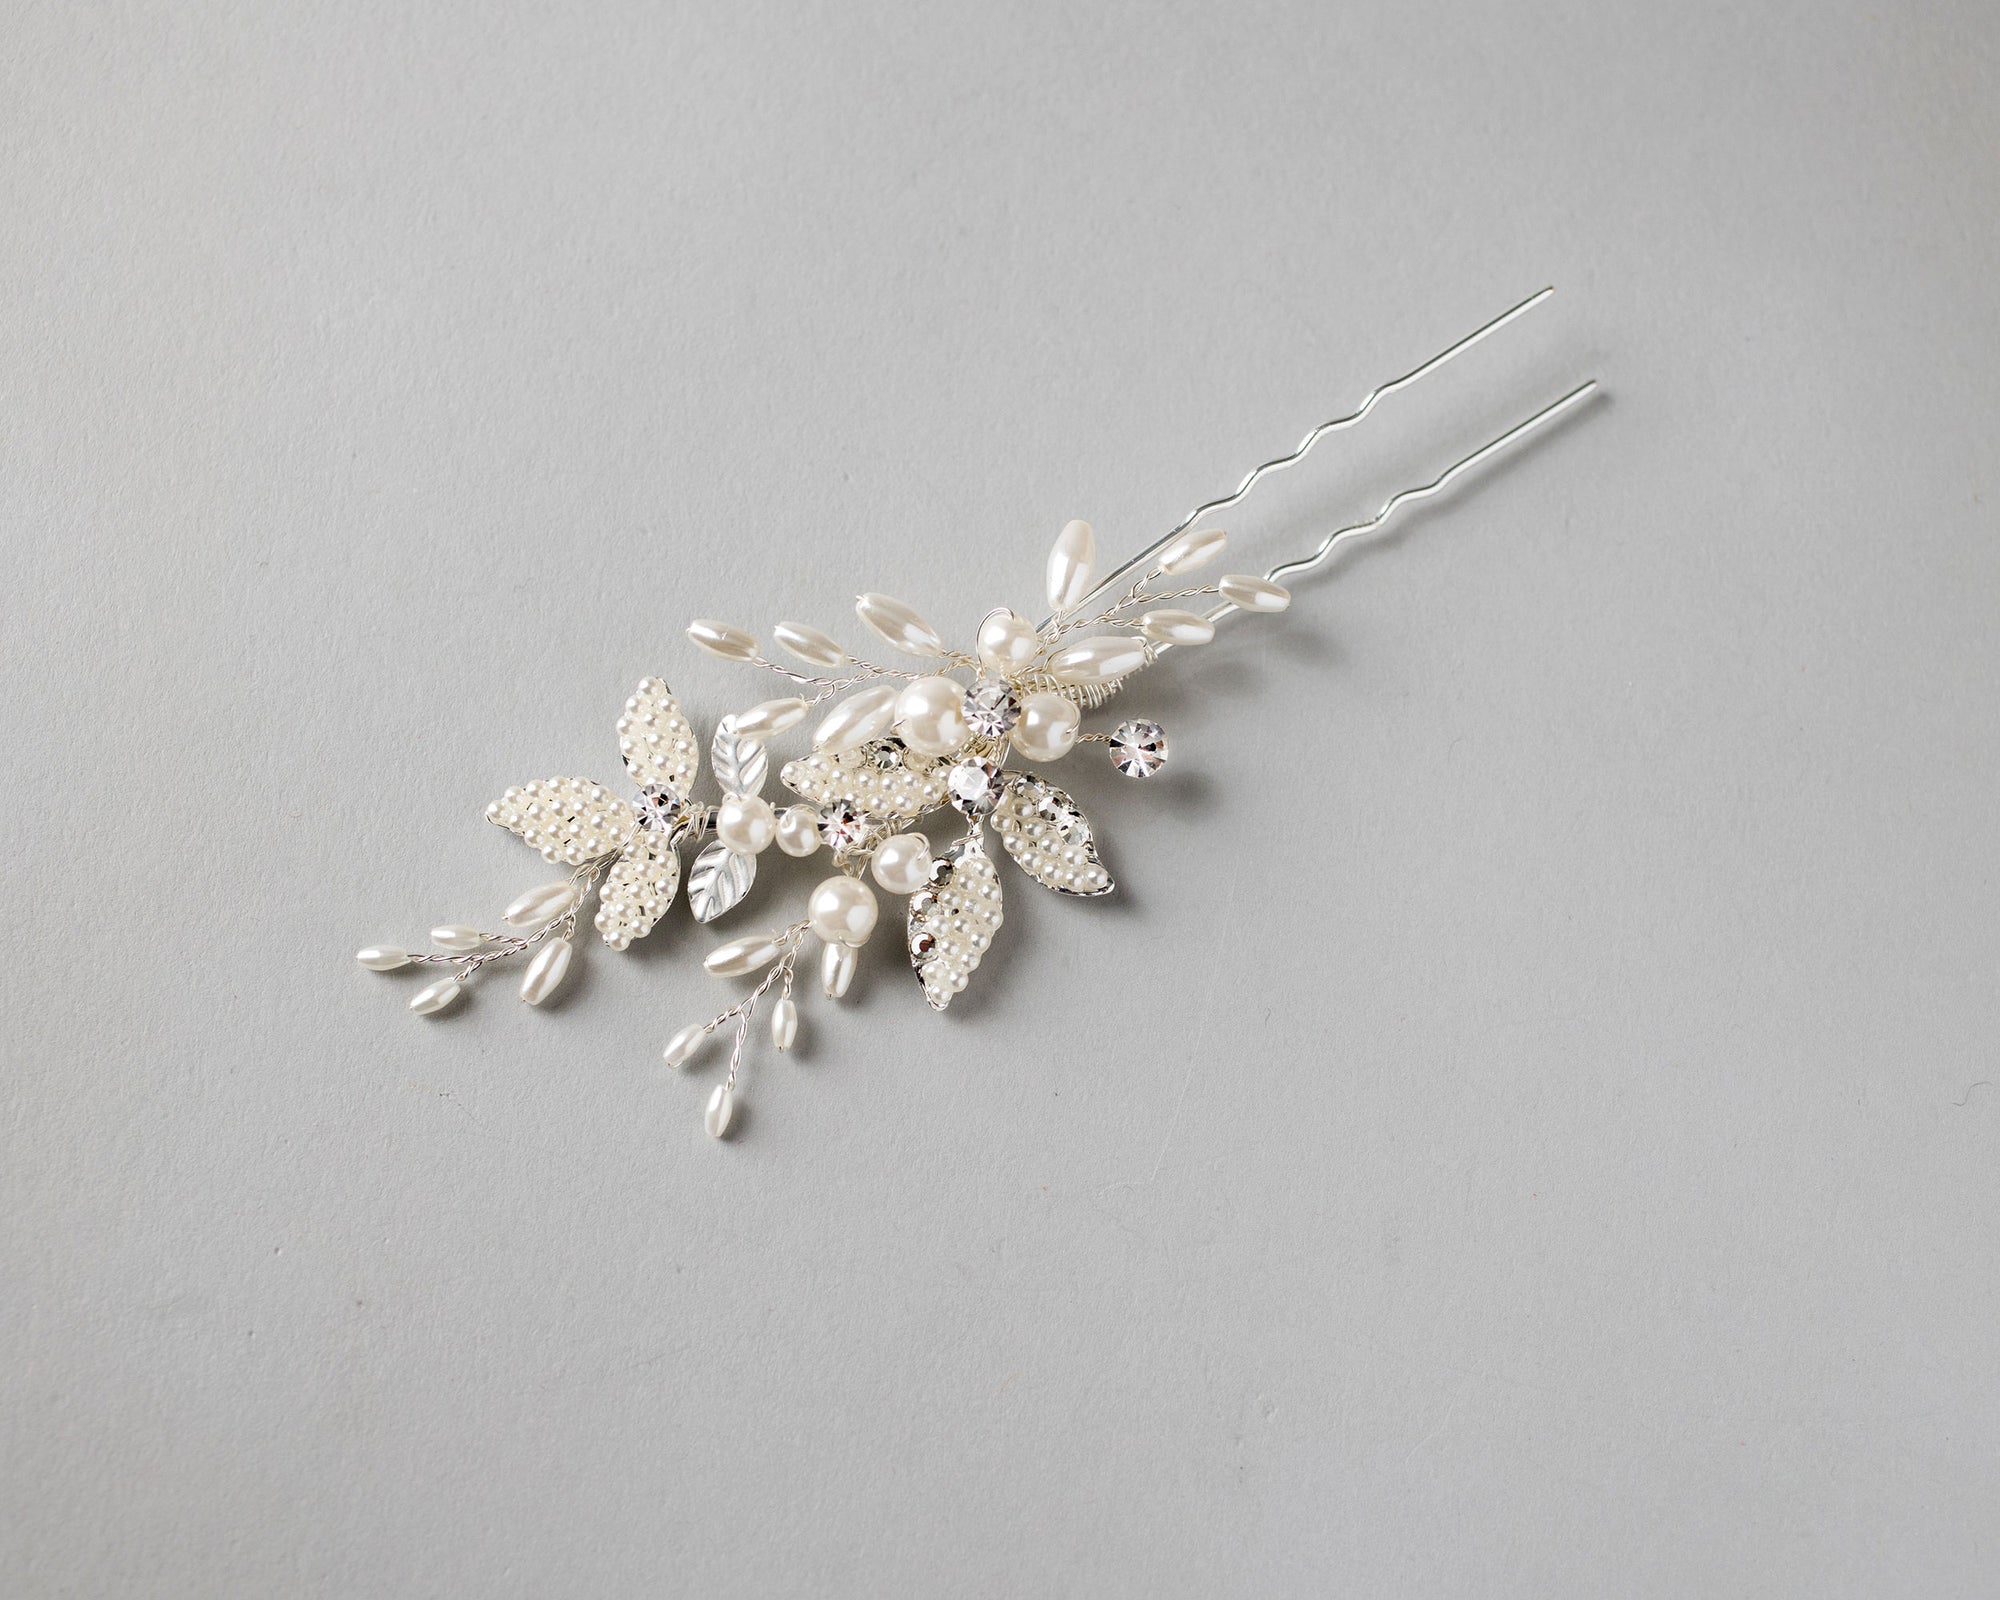 Pearled Leaves and Oat Beads Wedding Hair Pin by Cassandra Lynne